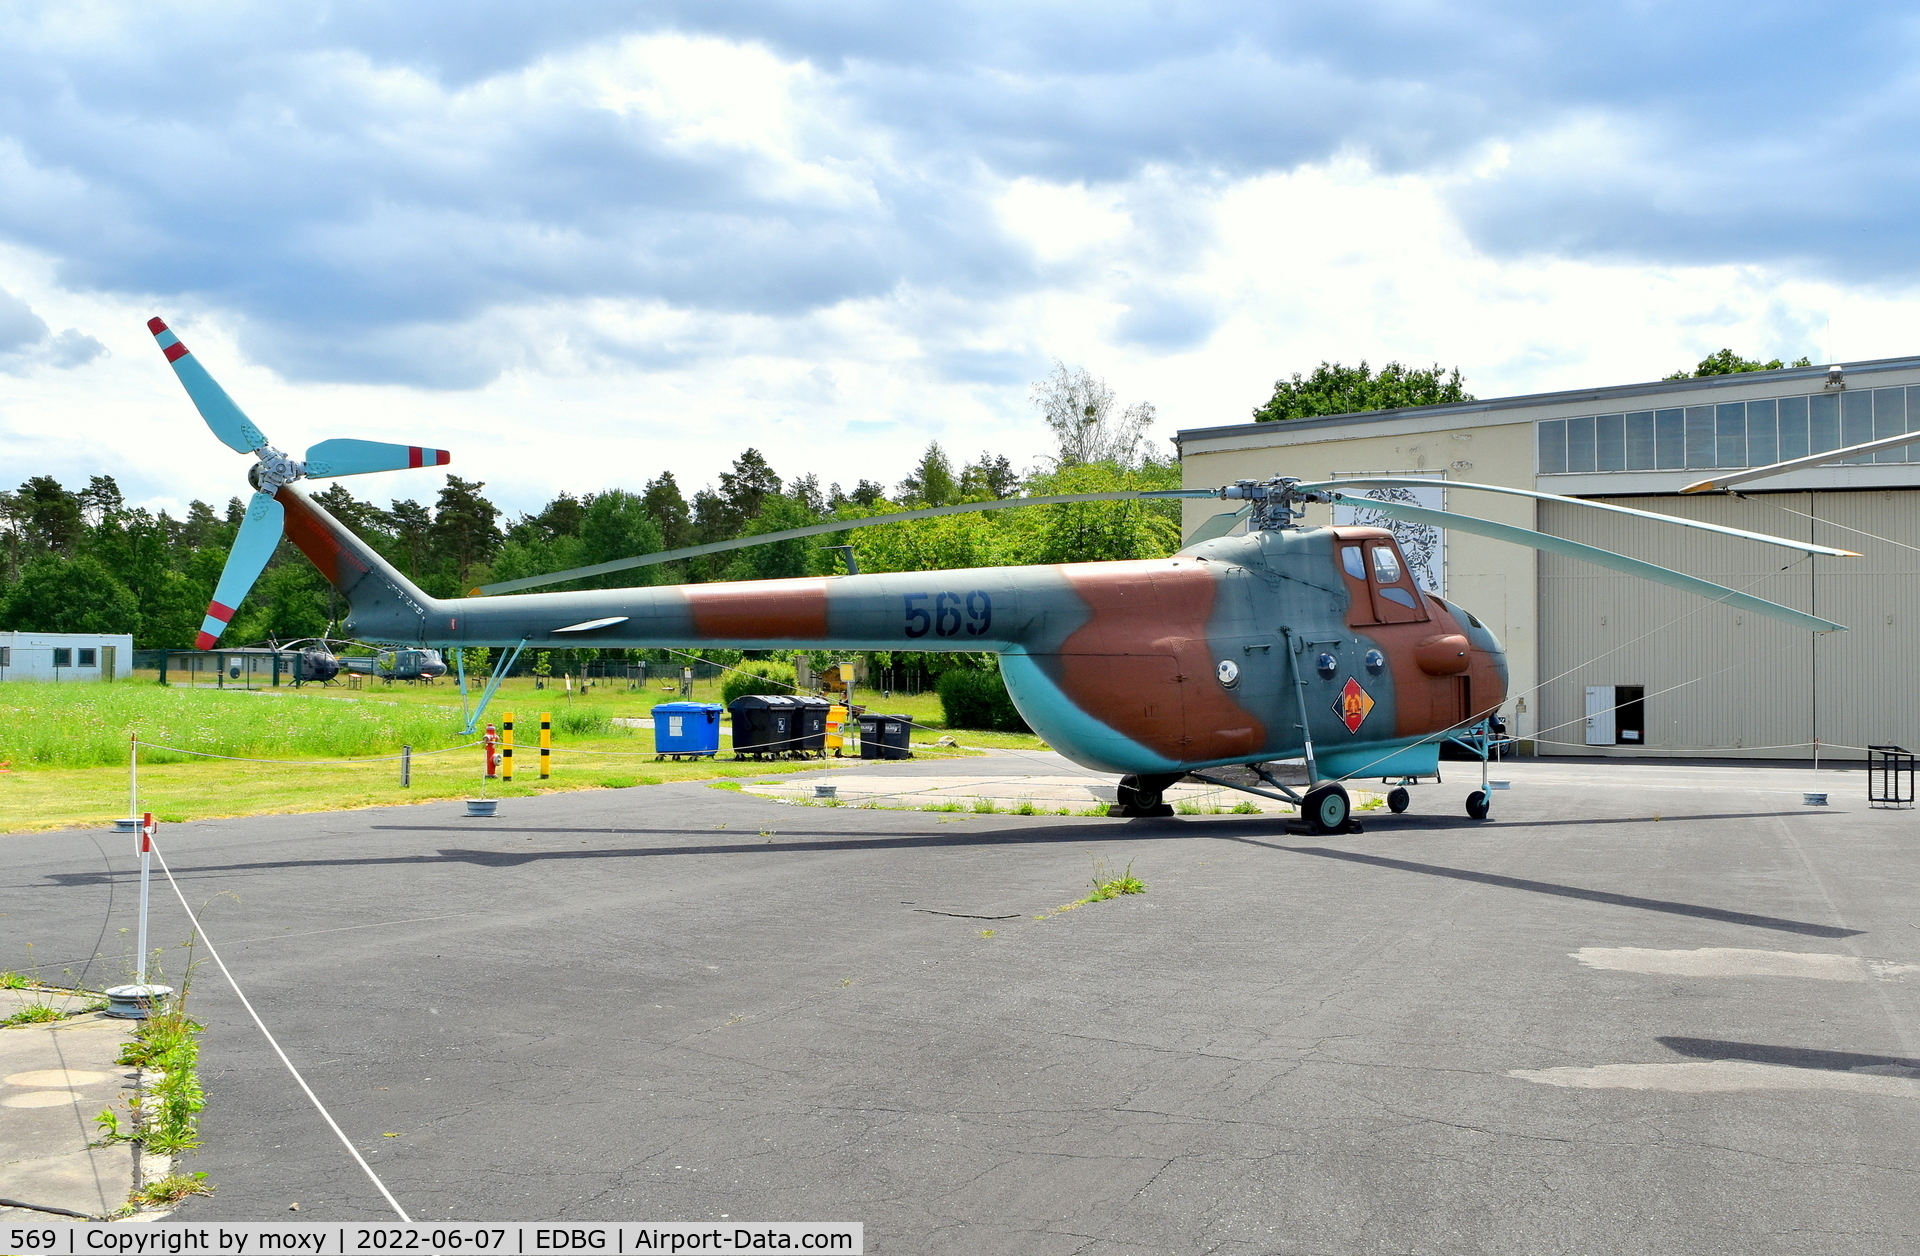 569, 1963 Mil Mi-4A Hound C/N 13146, Mil Mi-4A Hound at the Bundeswehr Museum of Military History – Berlin-Gatow Airfield.